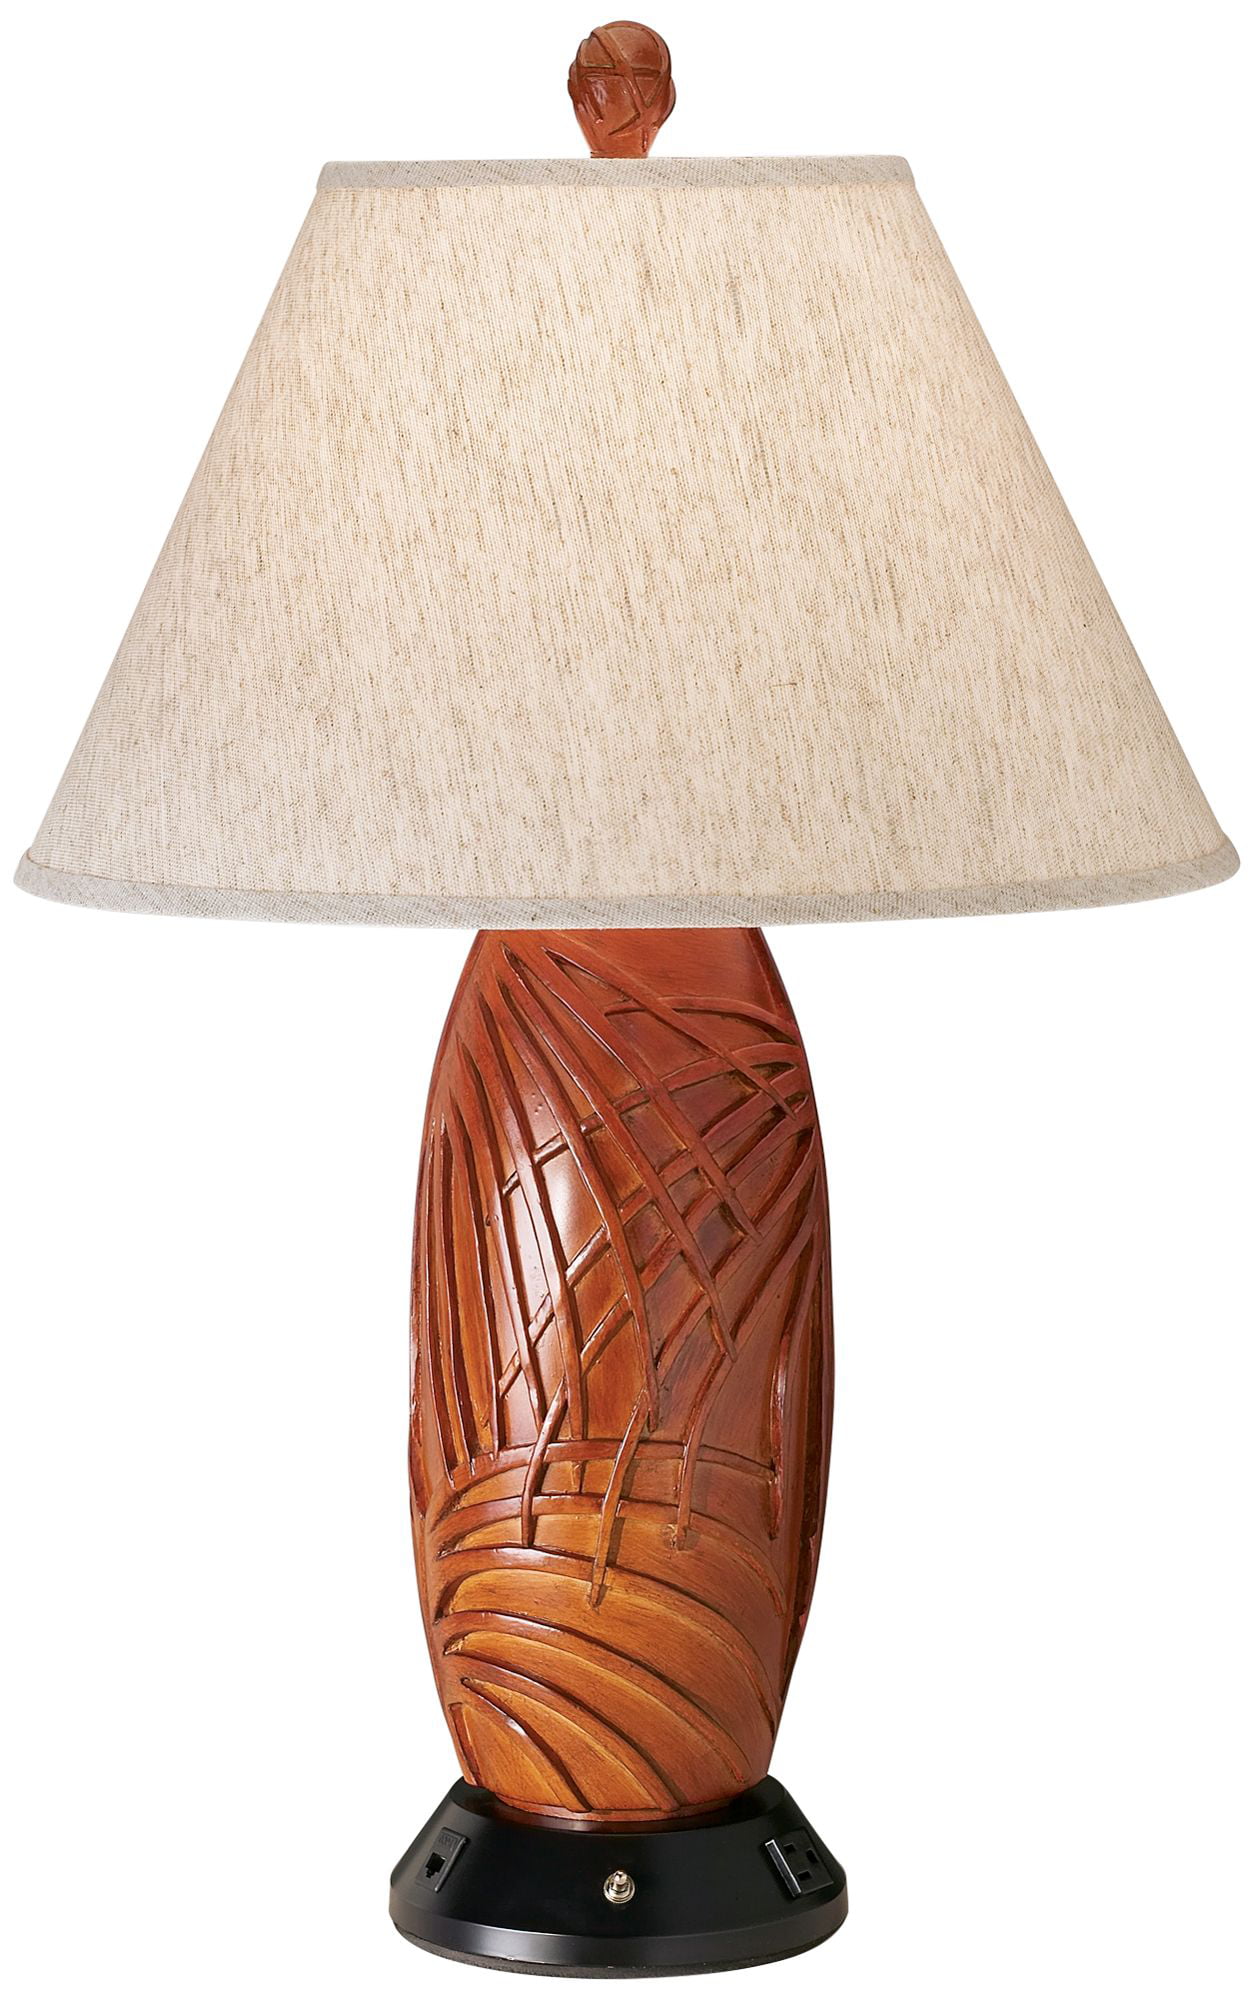 360 Lighting Tropical Table Lamp With, Antique Table With Built In Lamp